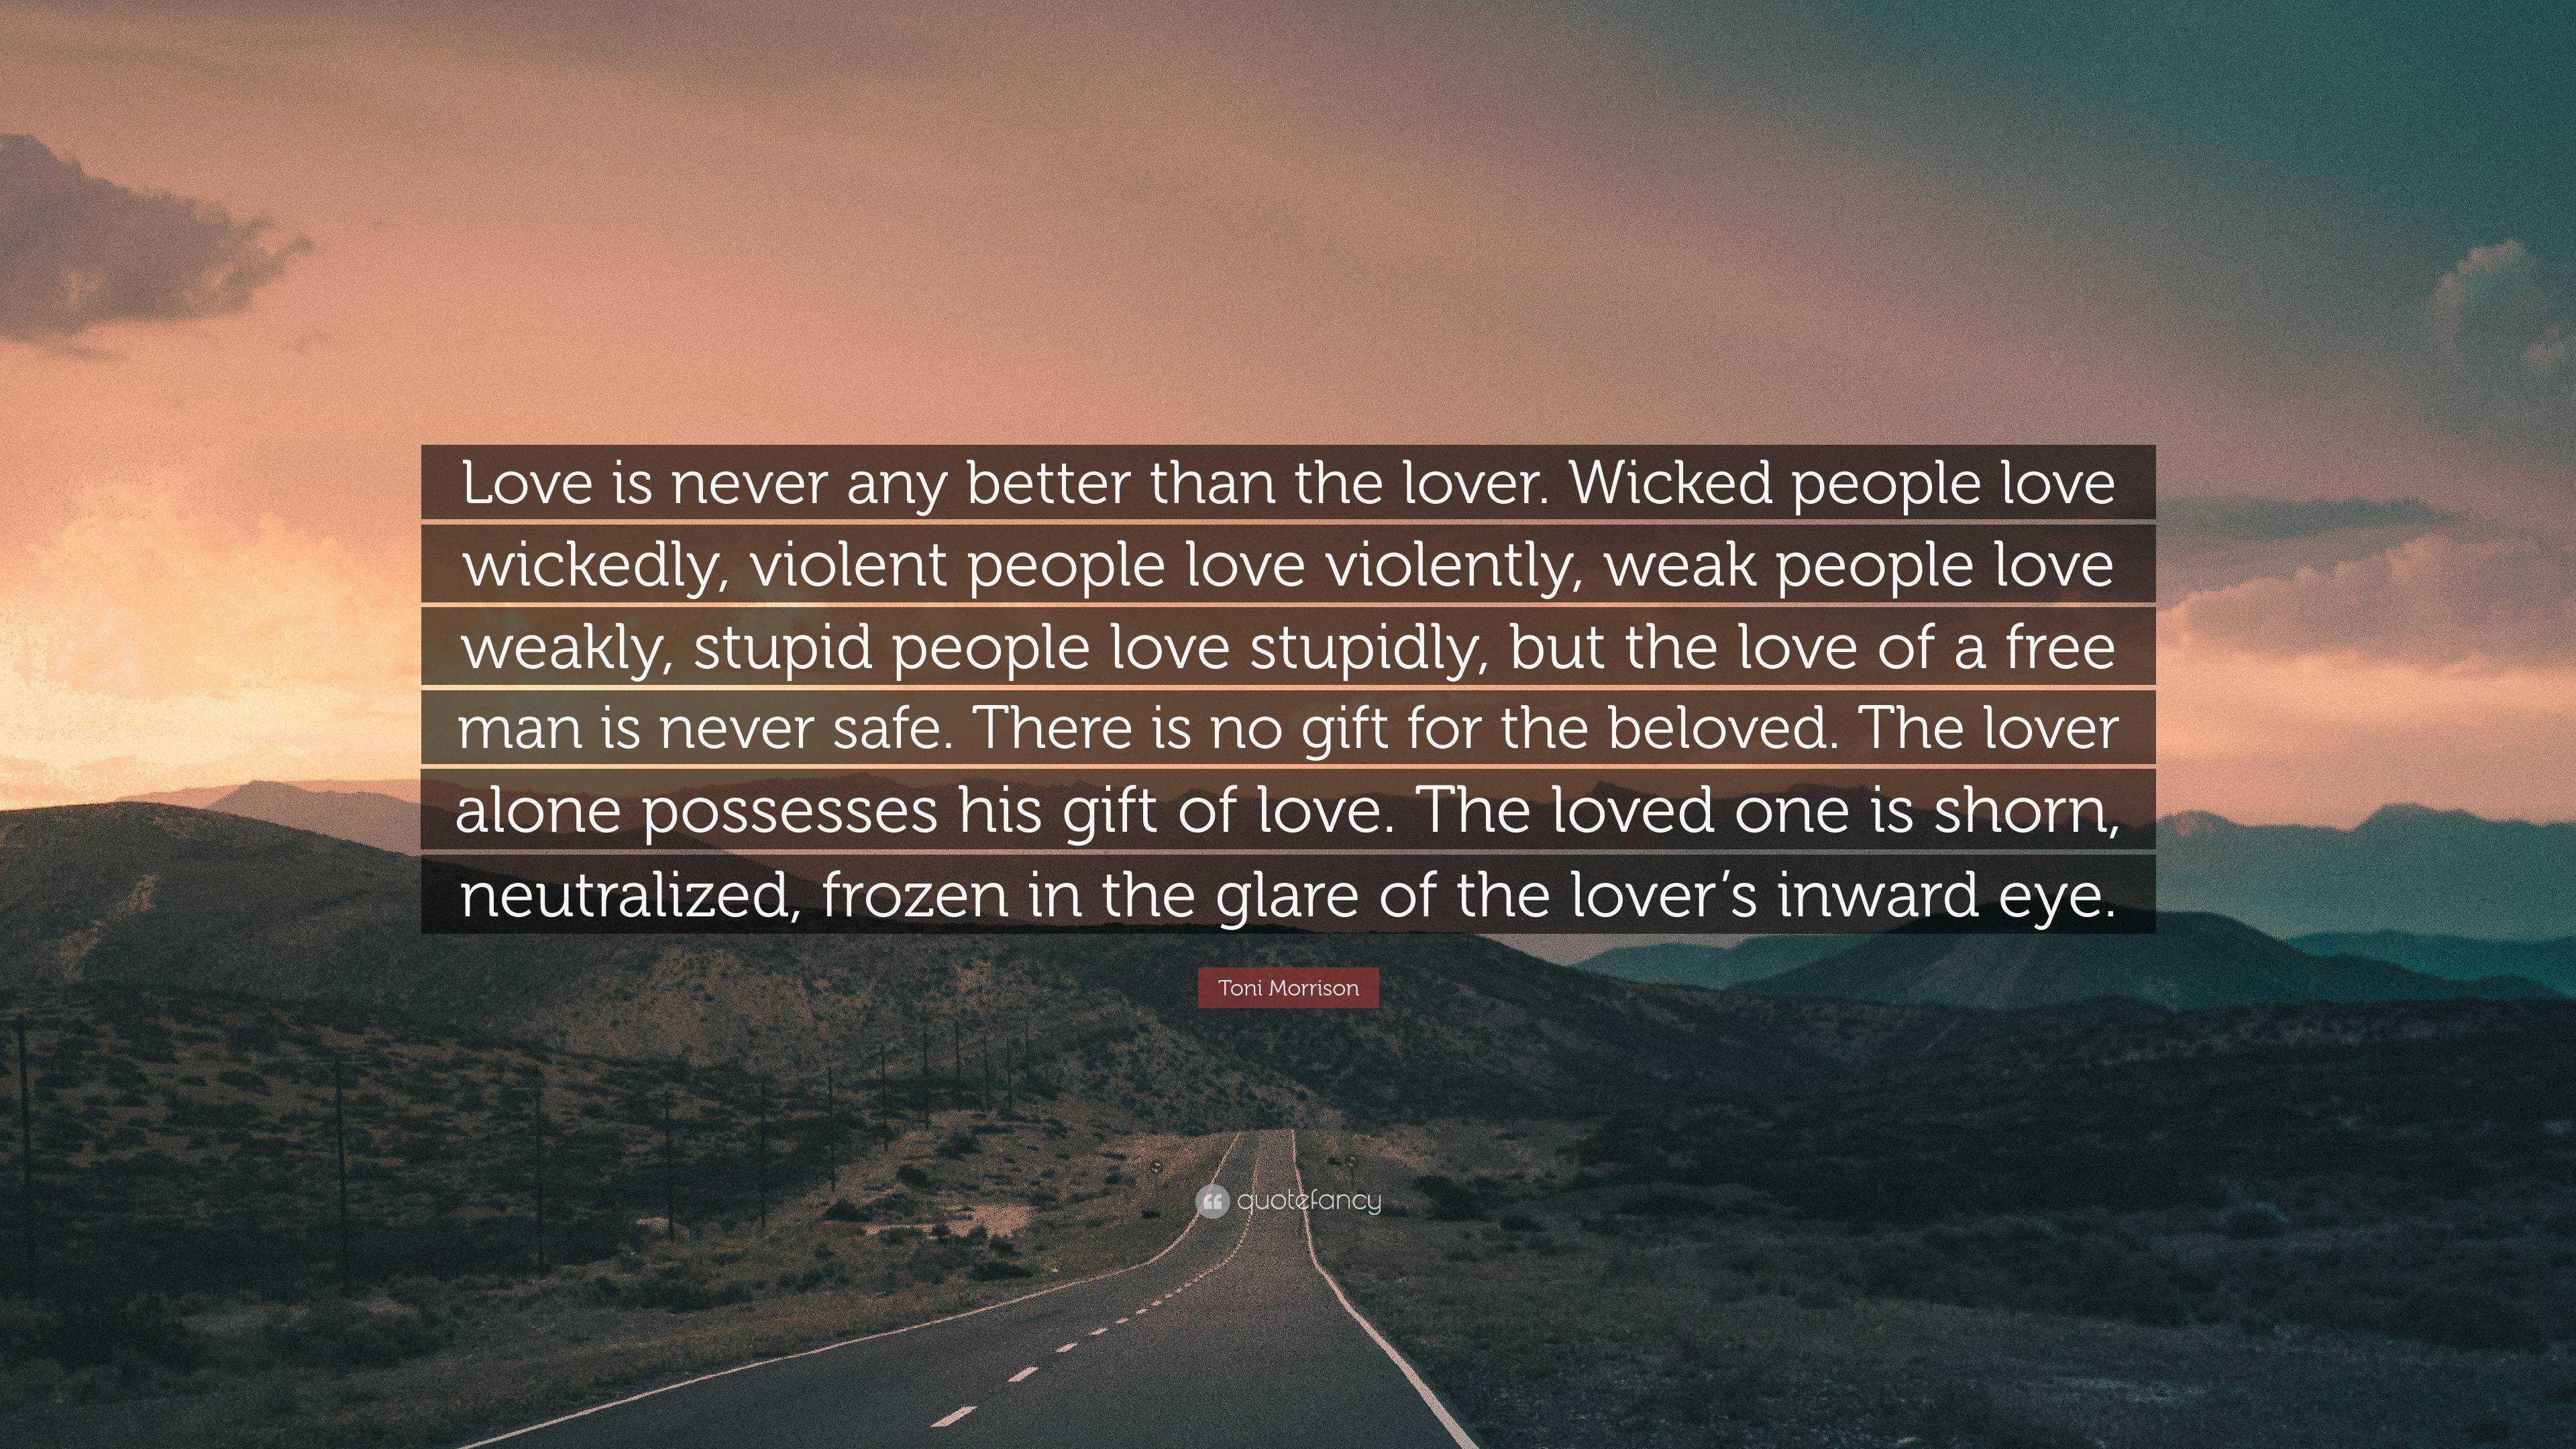 Toni Morrison Quote: “Love is never any better than the lover. Wicked